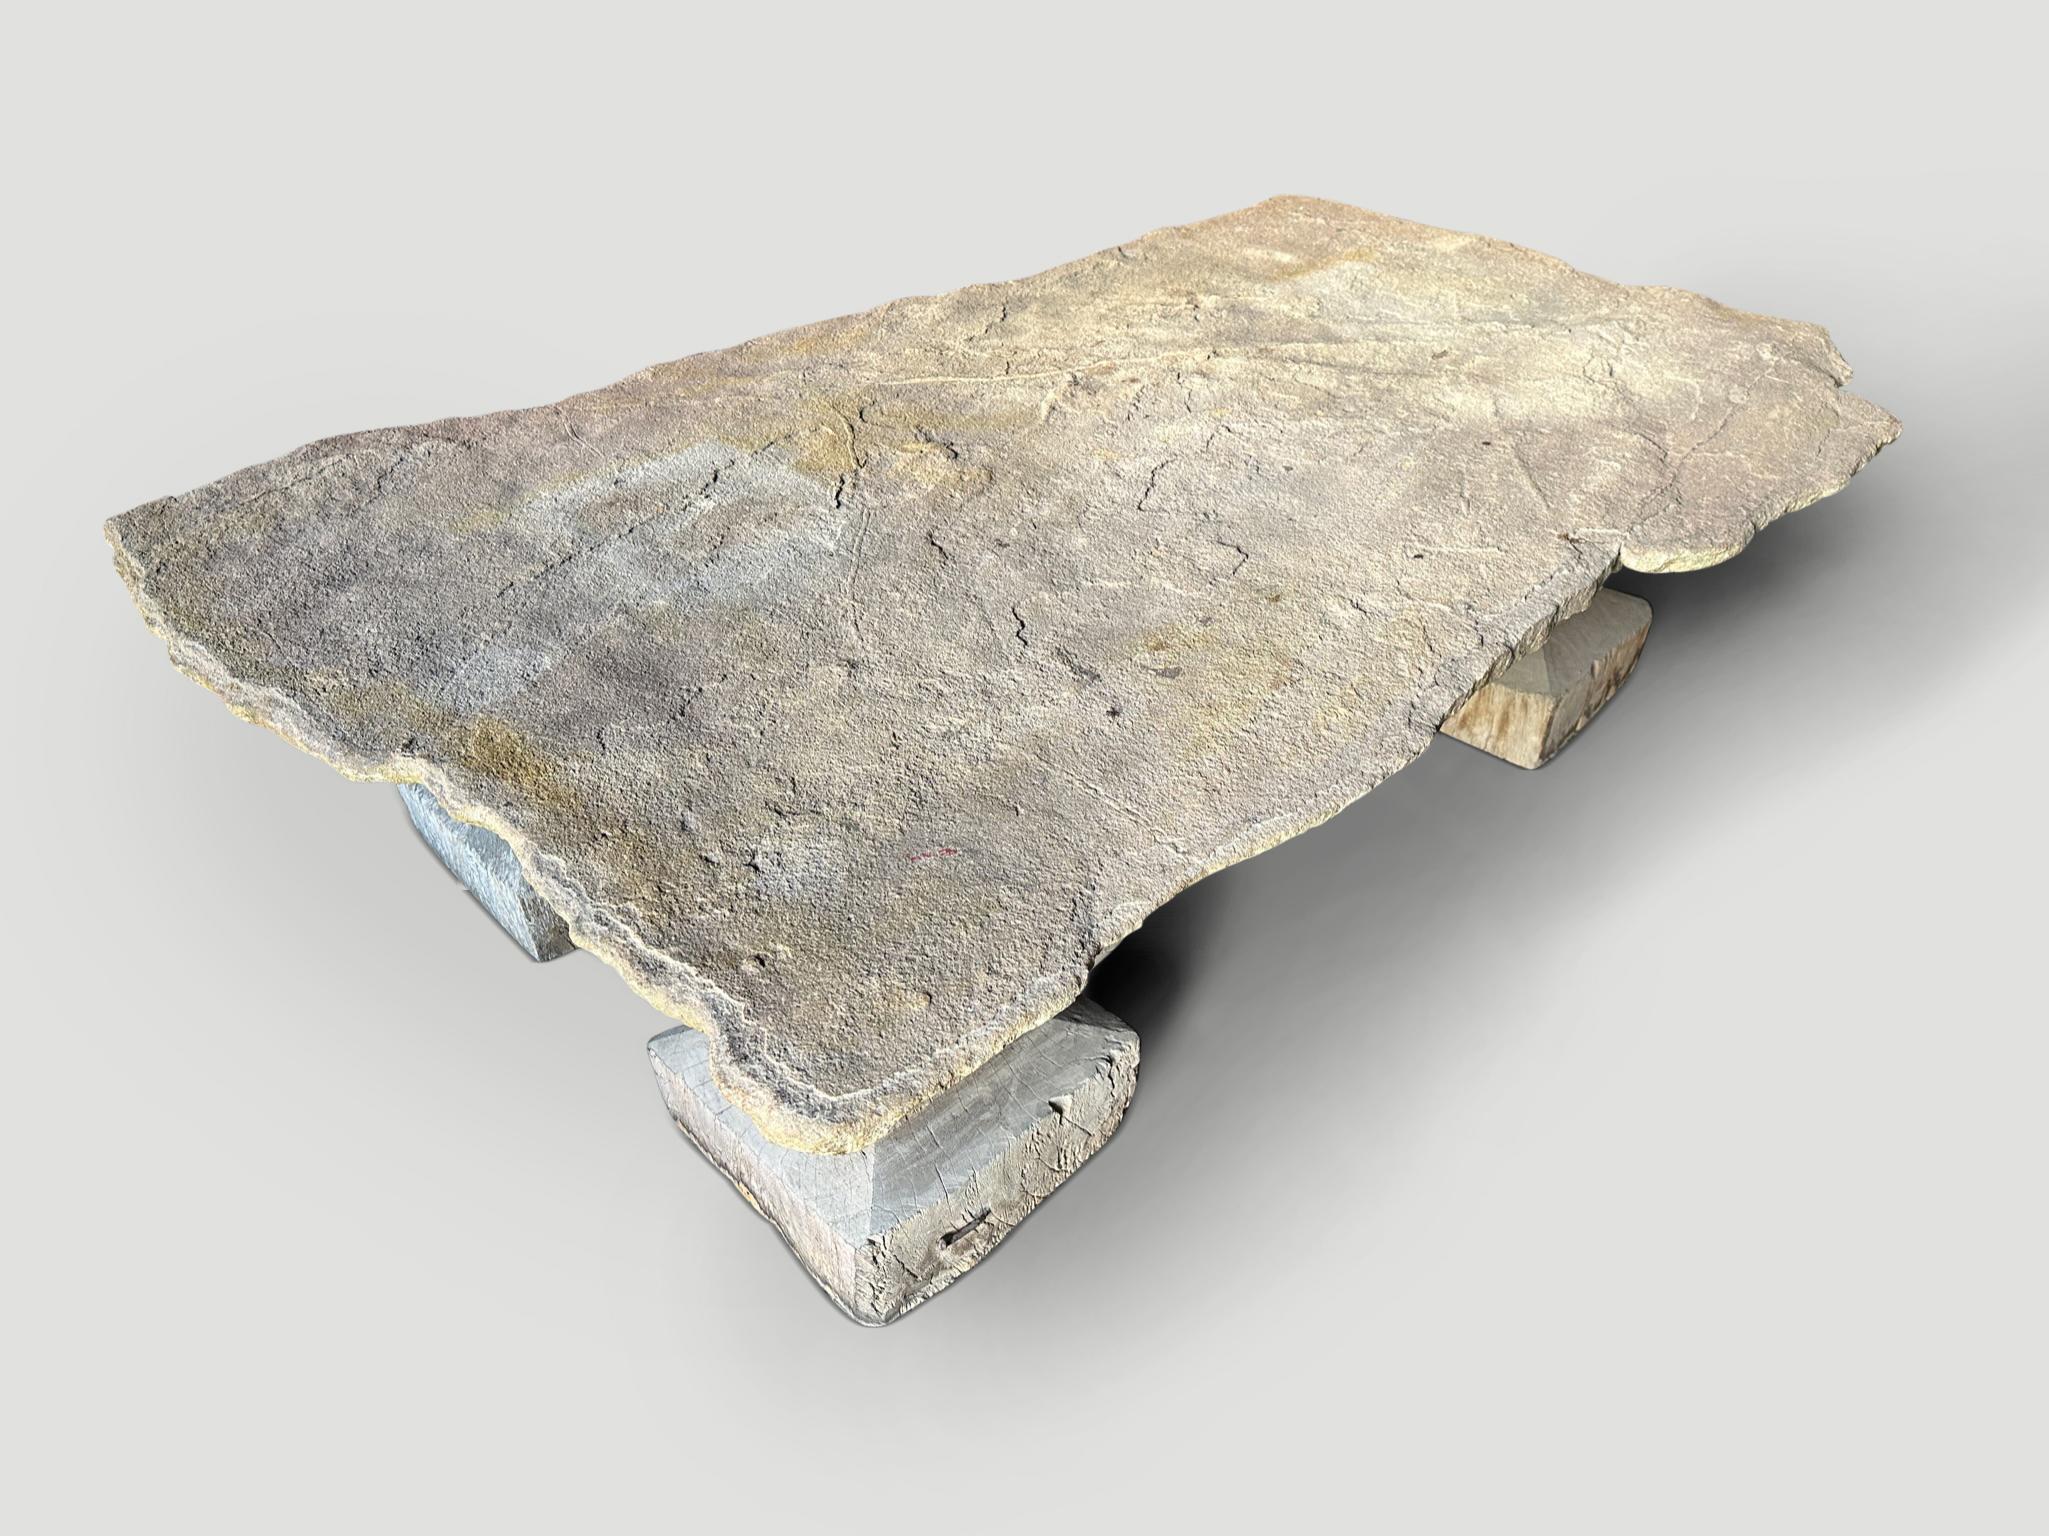 Beautiful antique Sumba stone live edge coffee table. This one of a kind slab rests on four hand carved teak century old  bases, original used as a base for a column. Fabulous textures and tones on this stunning four inch slab. Rare.

This coffee